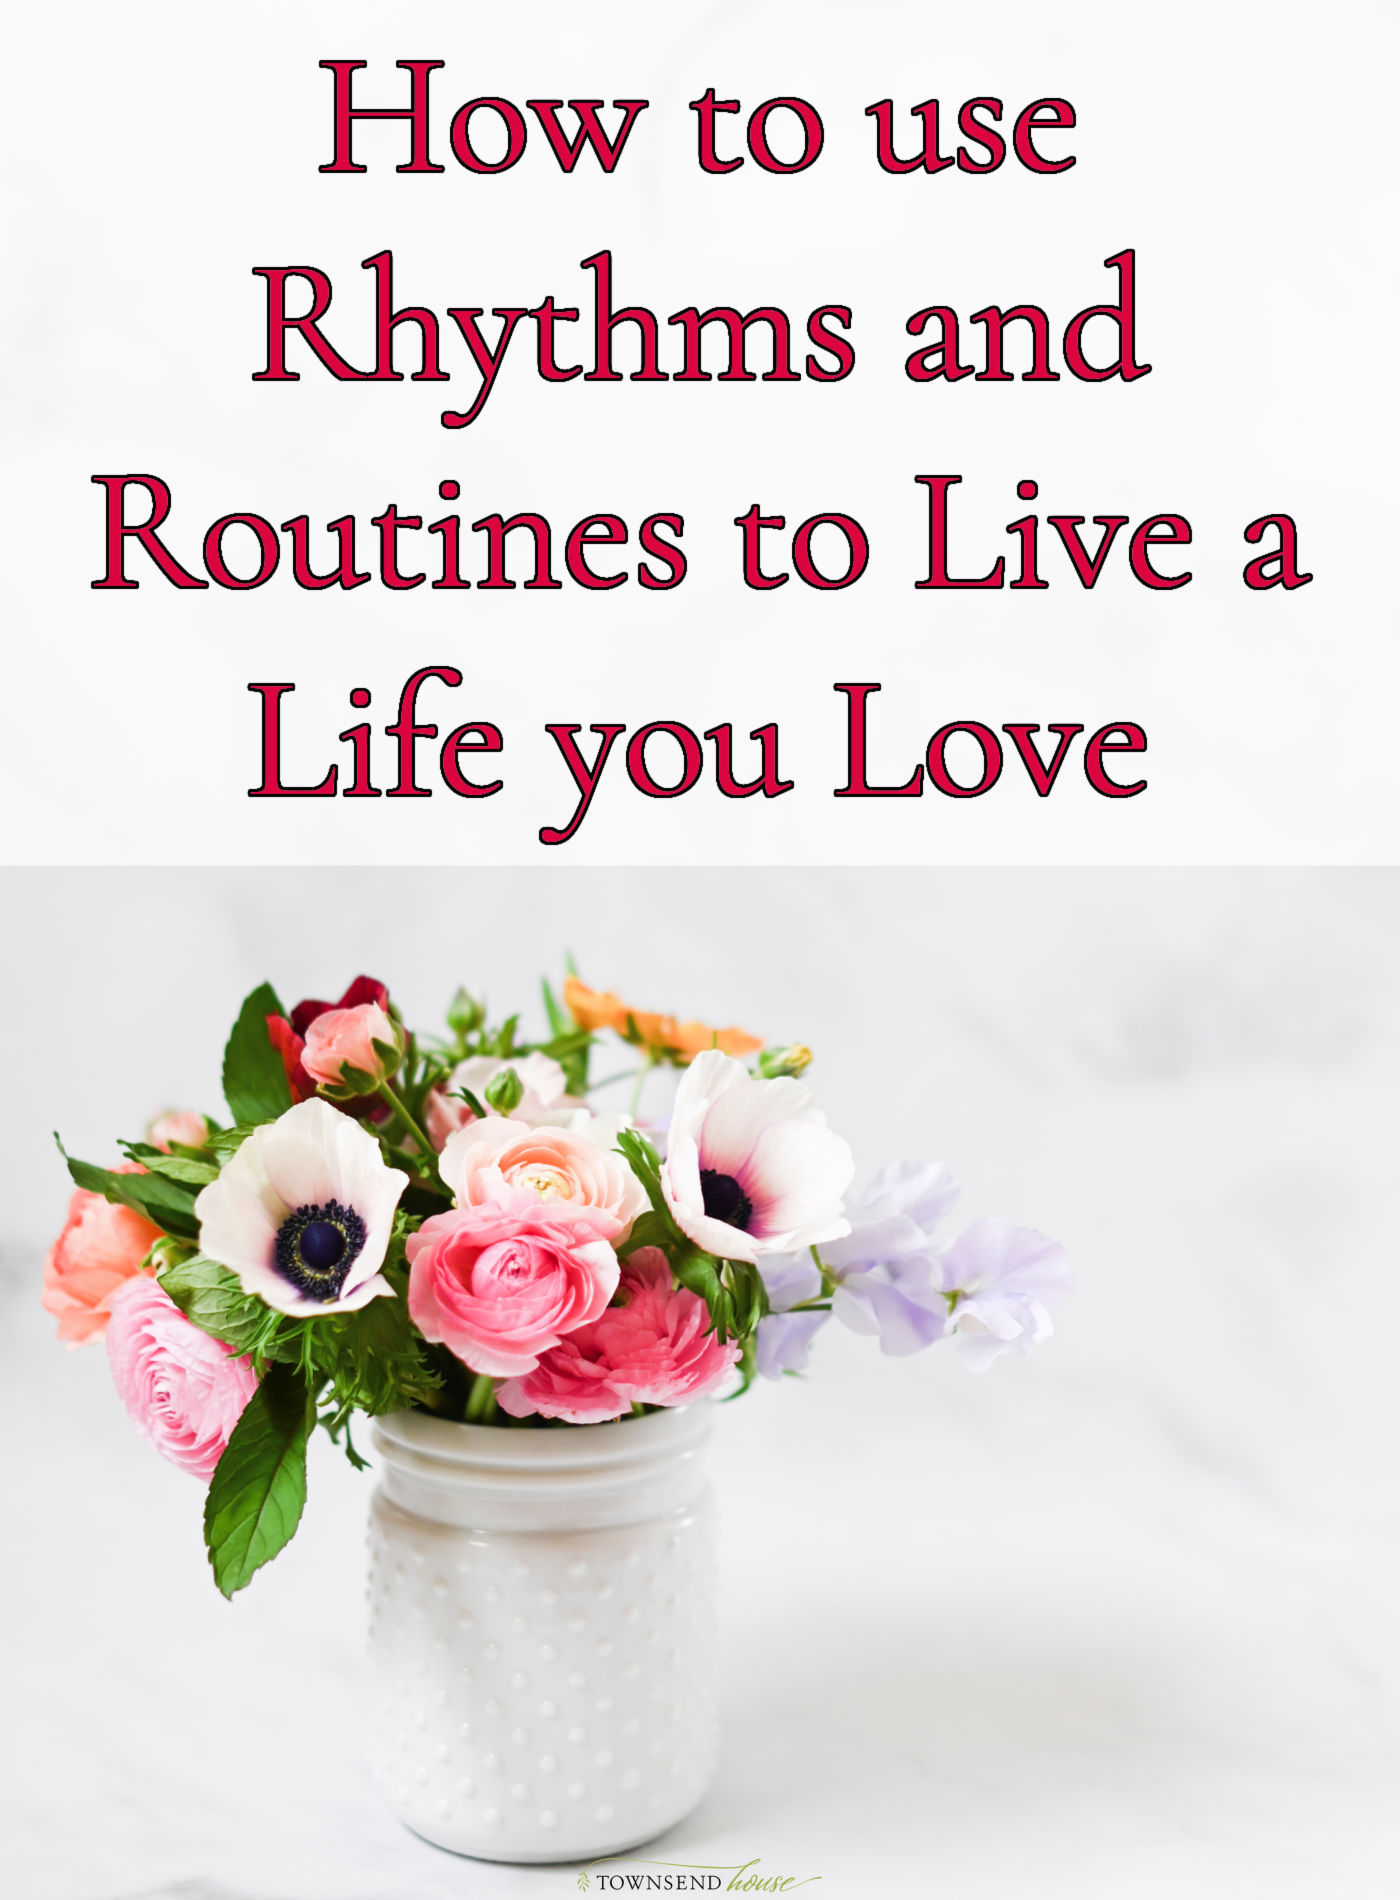 How to use Rhythms and Routines to Live a Life you Love